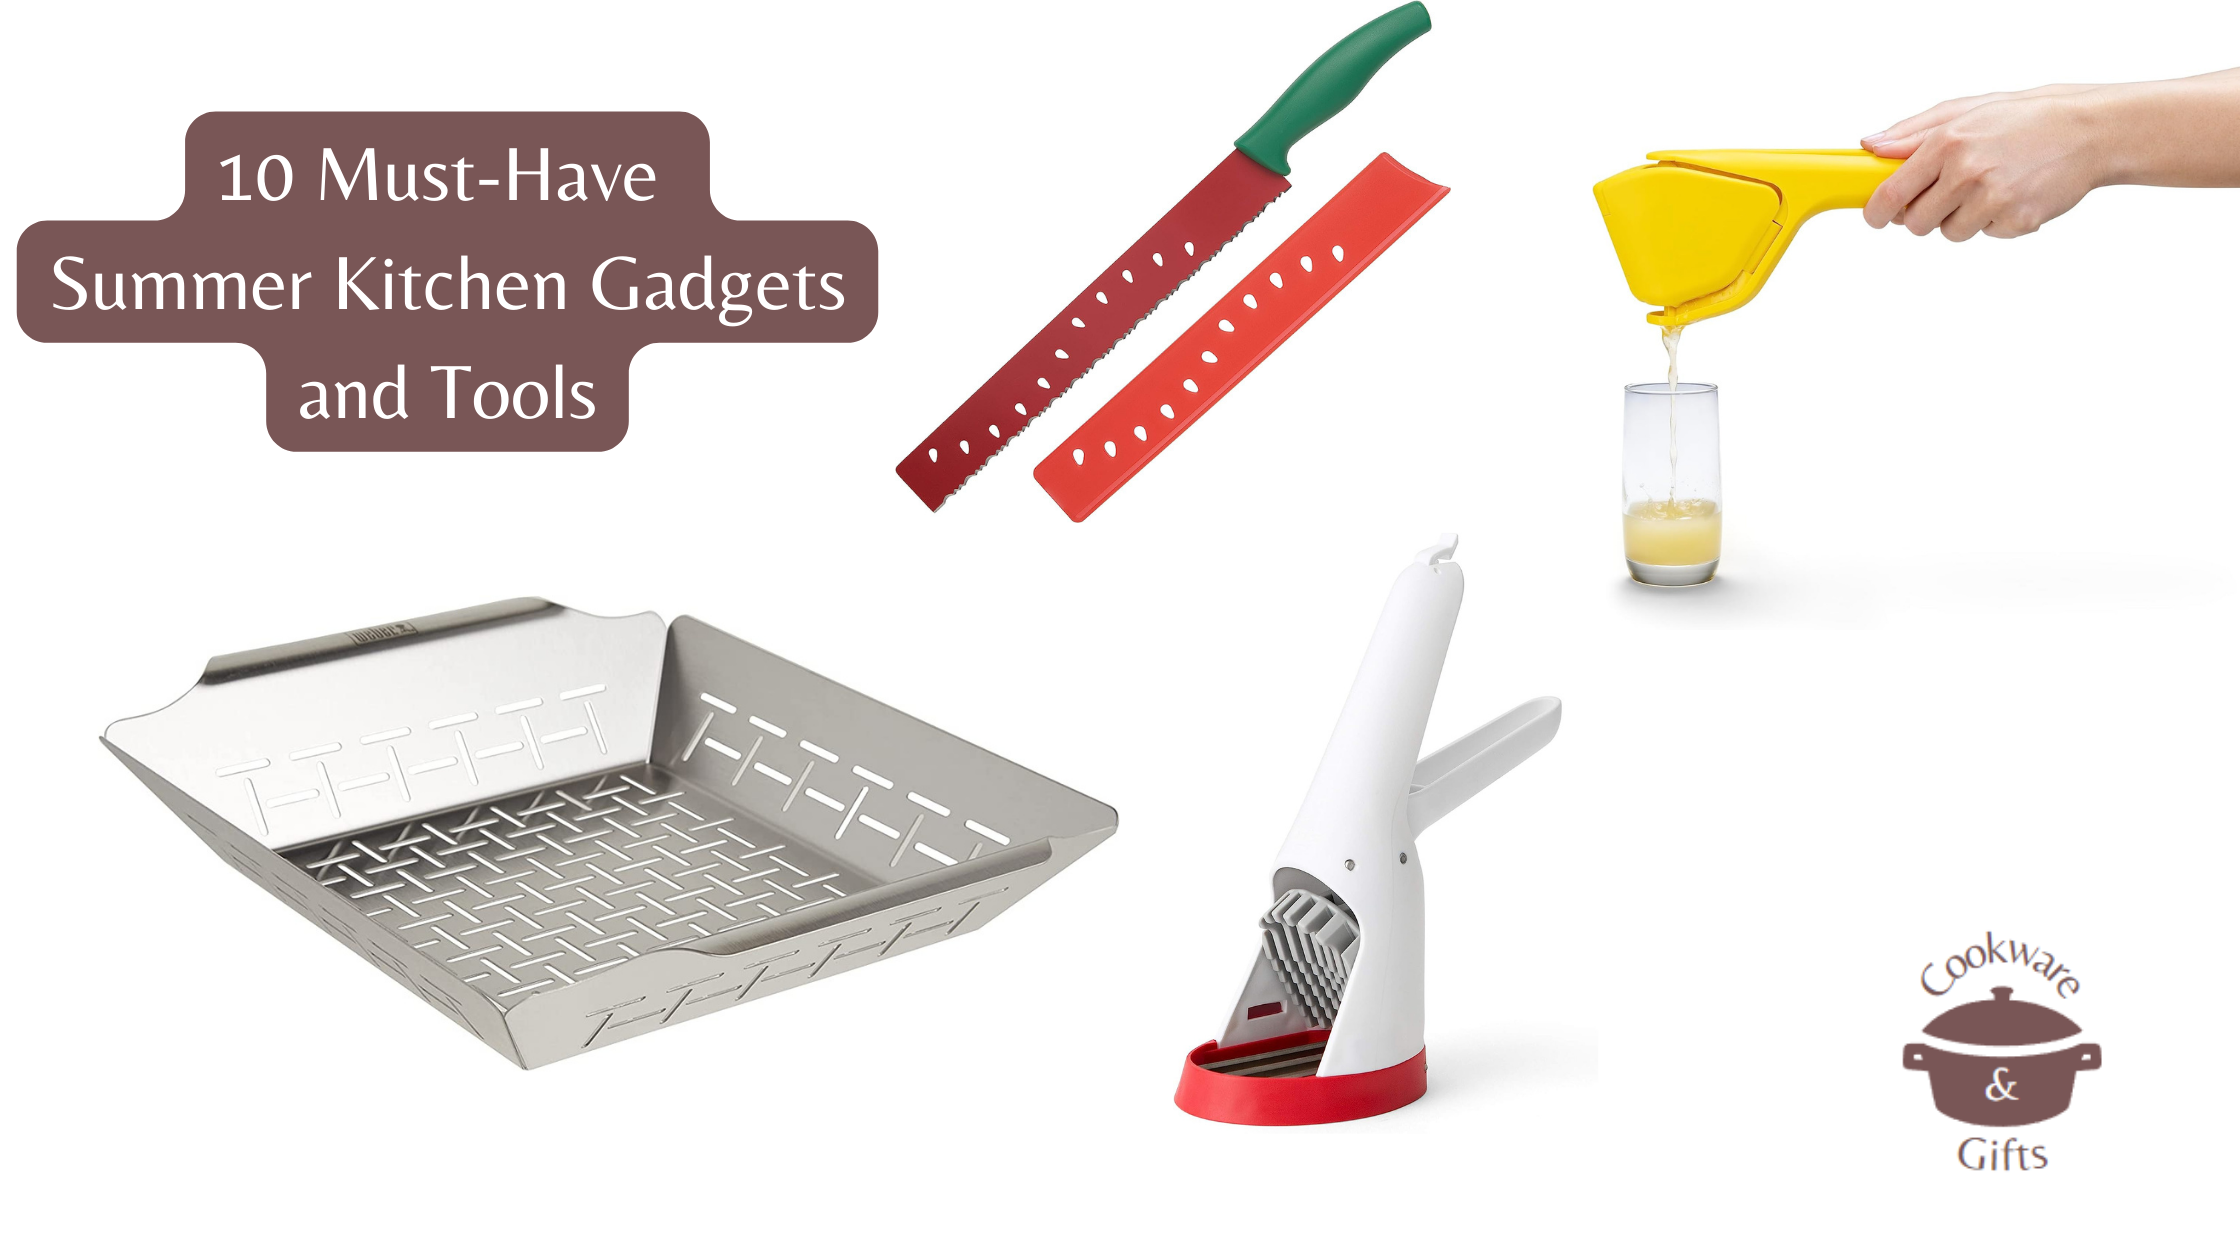 10 Summer Kitchen Gadgets and Tools That Will Make Your Cooking a Breeze!